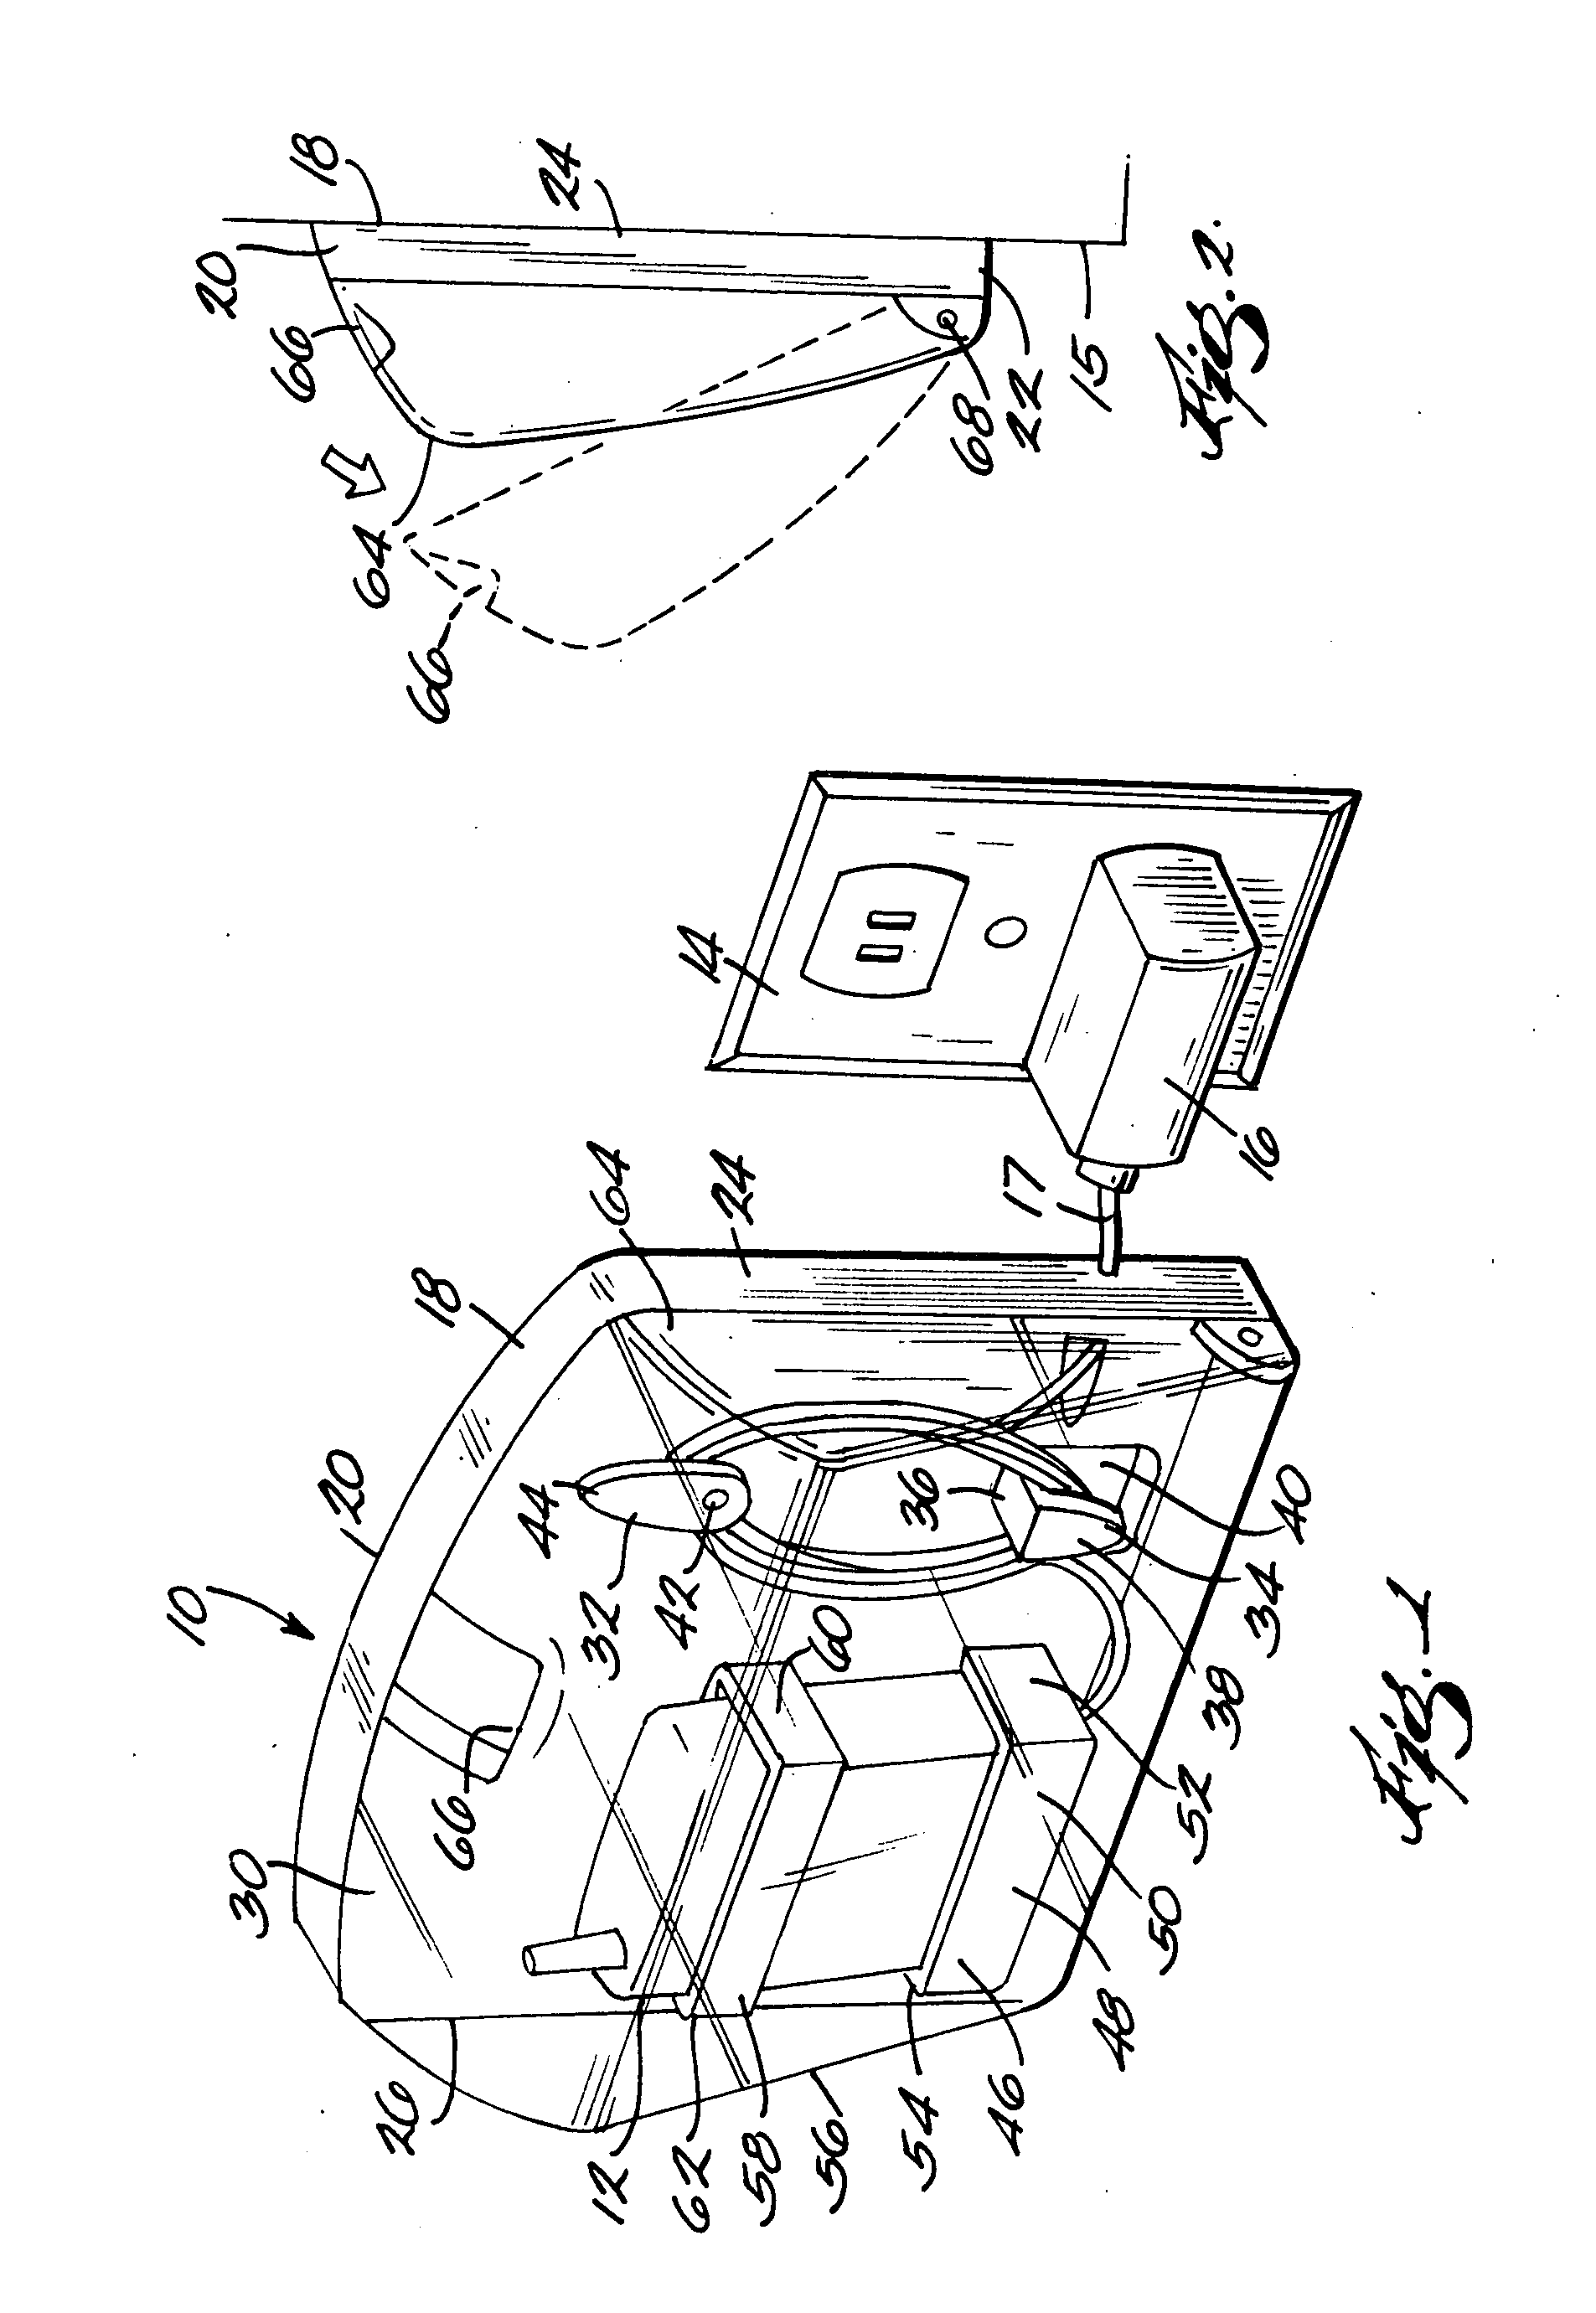 Charging station for portable electronic instruments